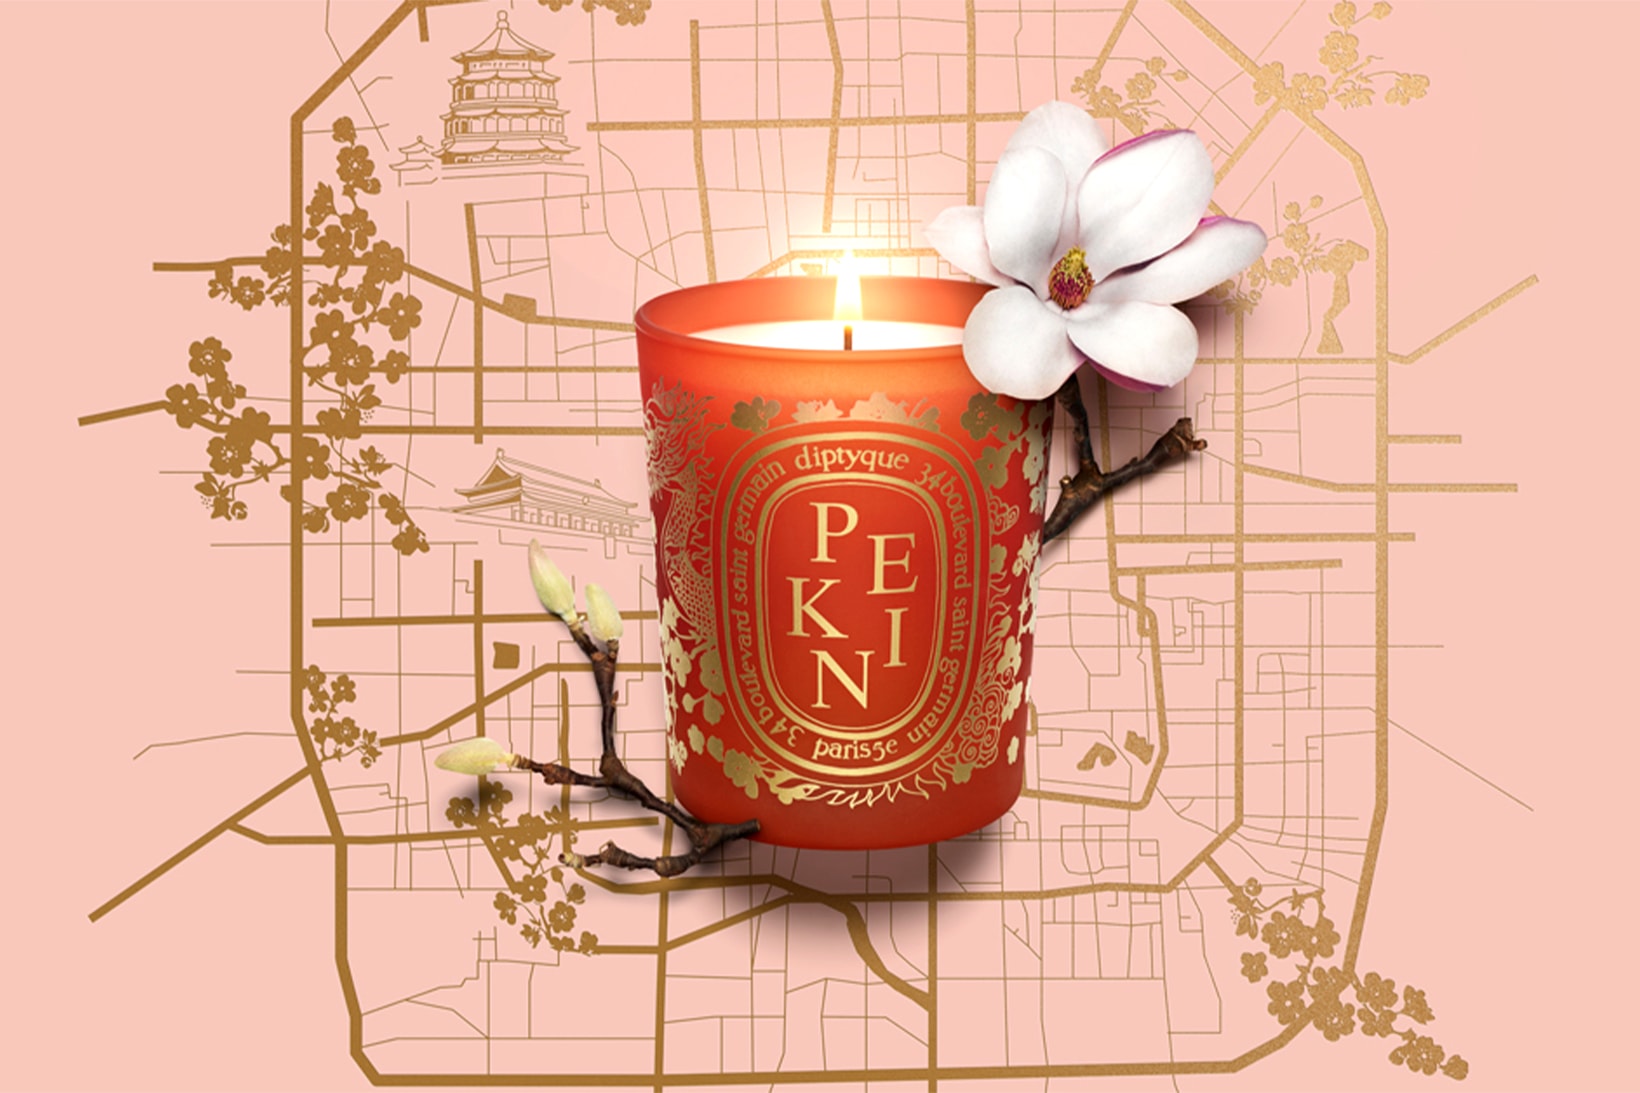 diptyque city candle collection pekin candles fragrances re-release info